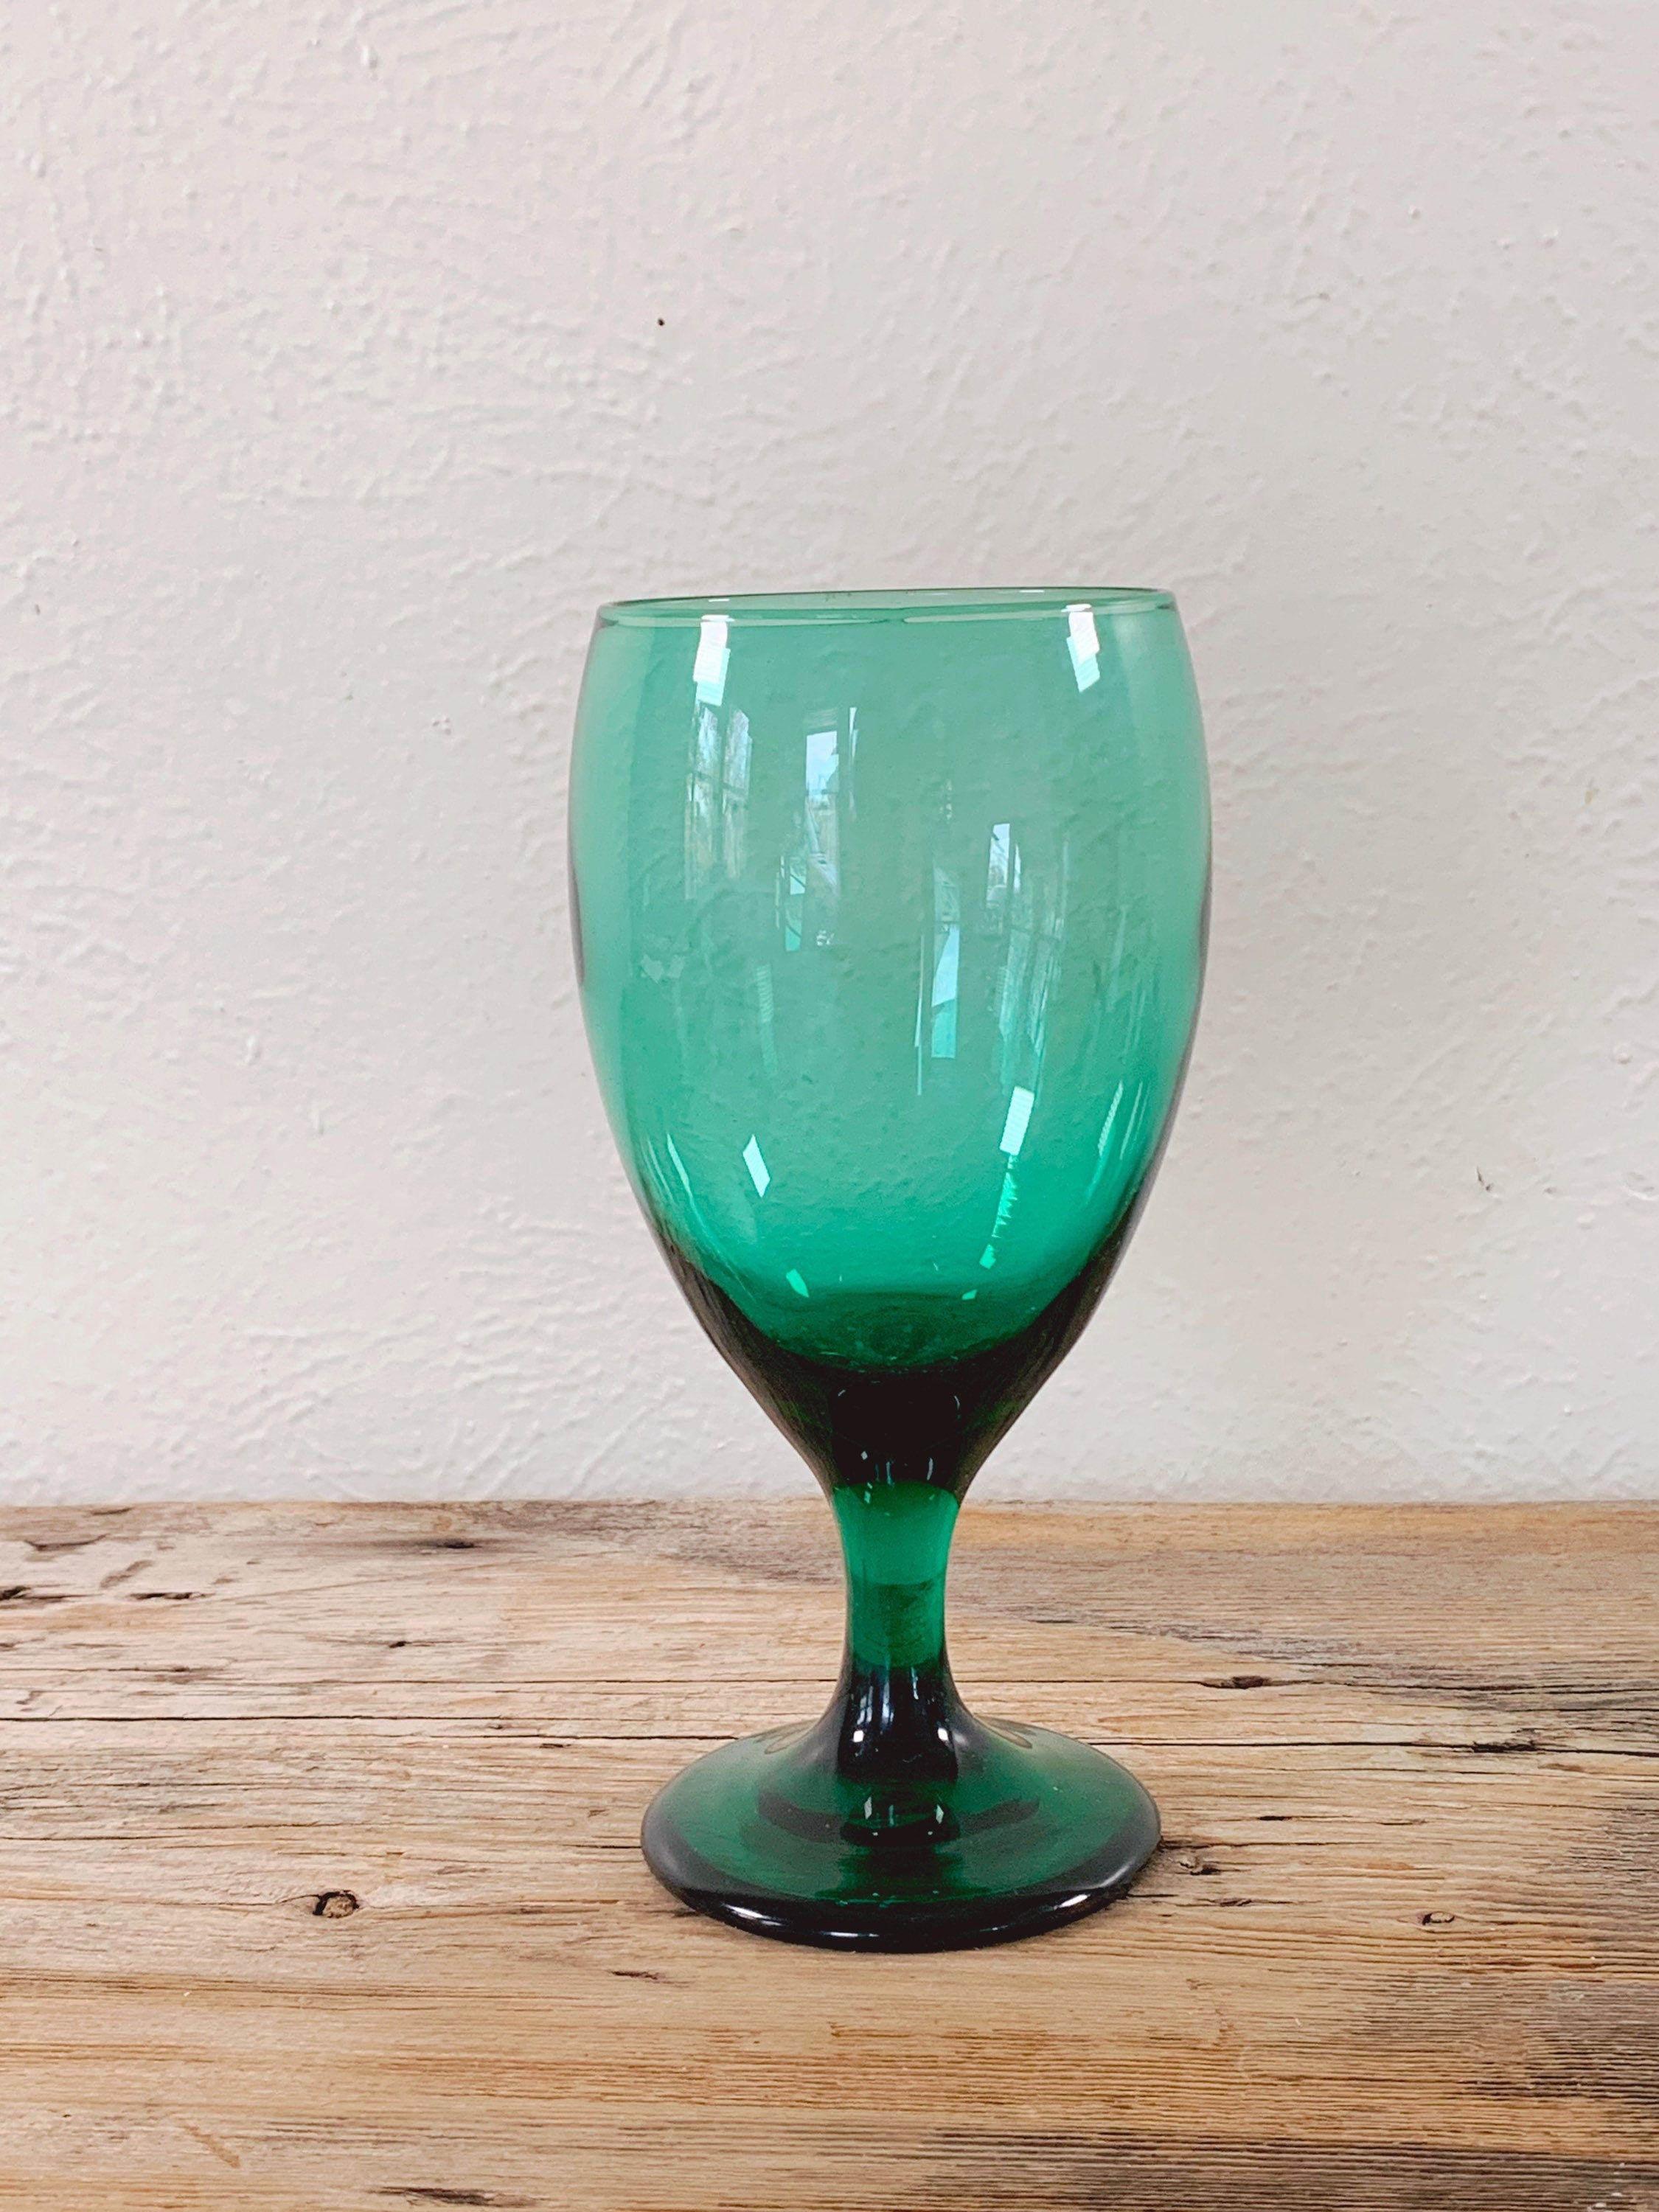 Vintage Mid-Century Libbey Juniper Green Tear Drop Wine Glasses or Water Goblets | Barware in Sets of 2, 4, 6 or 8 | Gift for Her